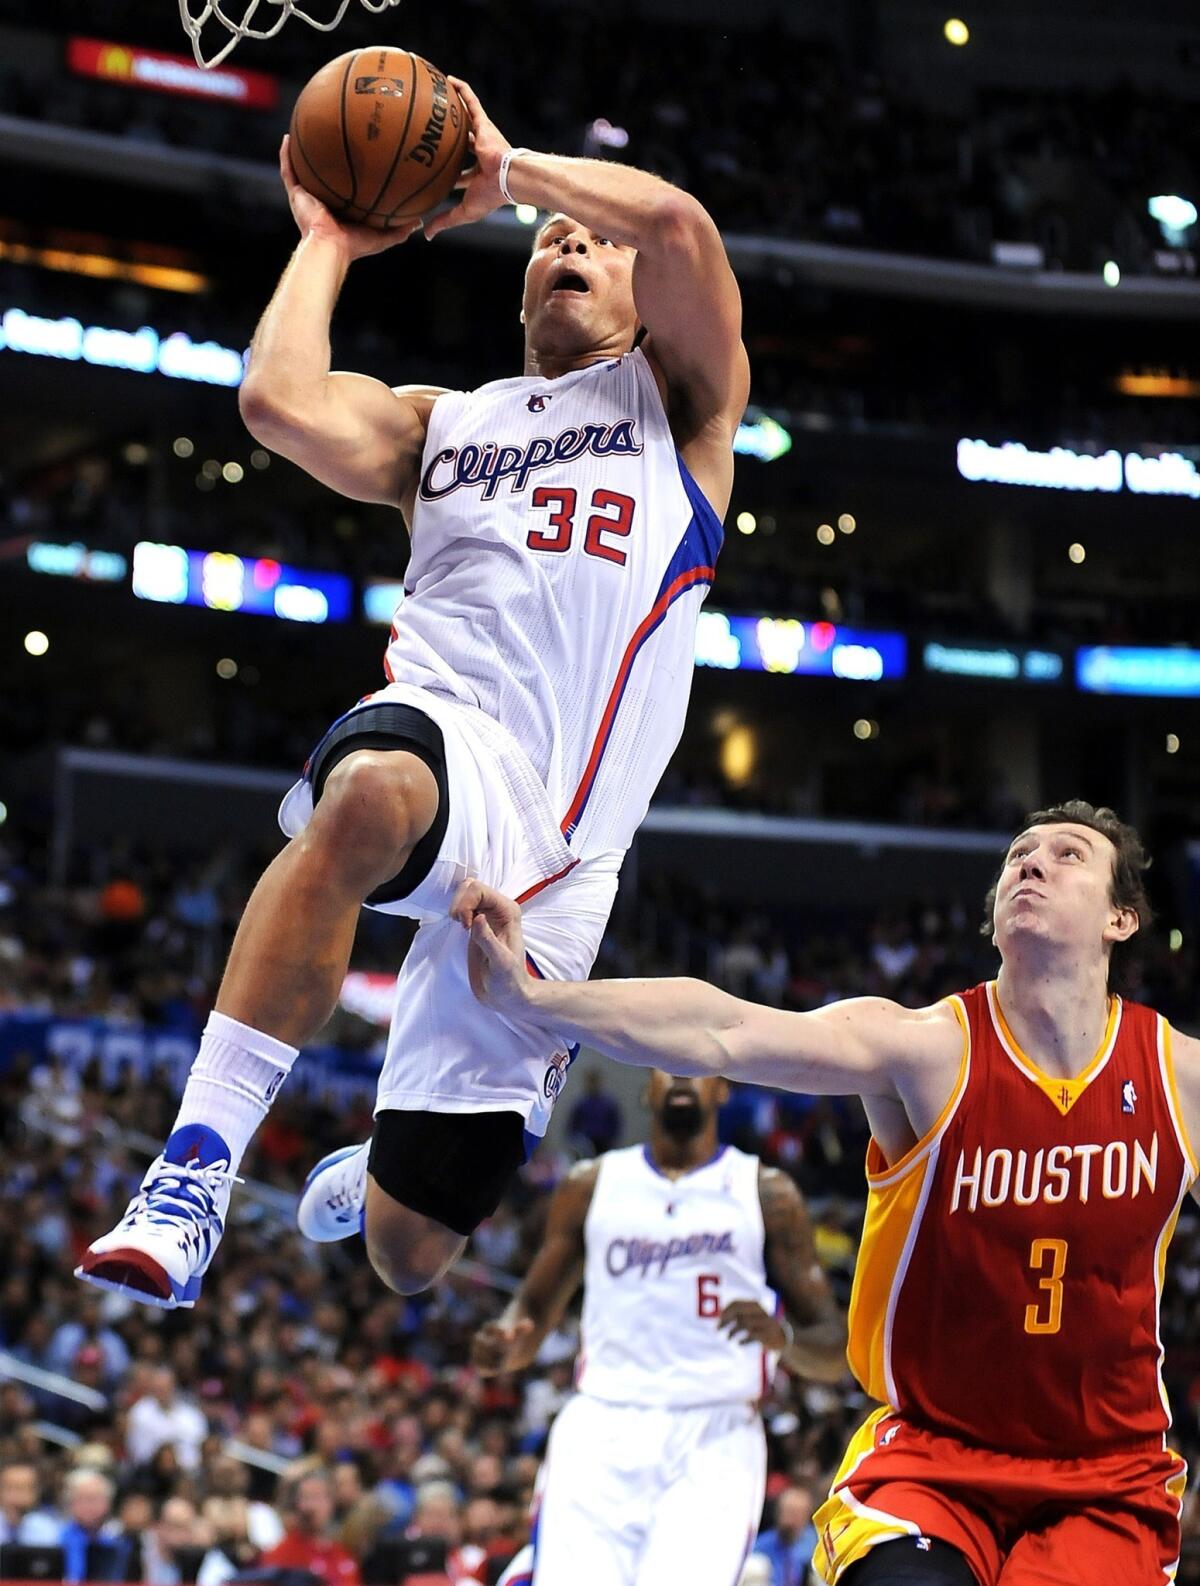 Clippers forward Blake Griffin dunks during the first half of Monday's game against the Rockets.